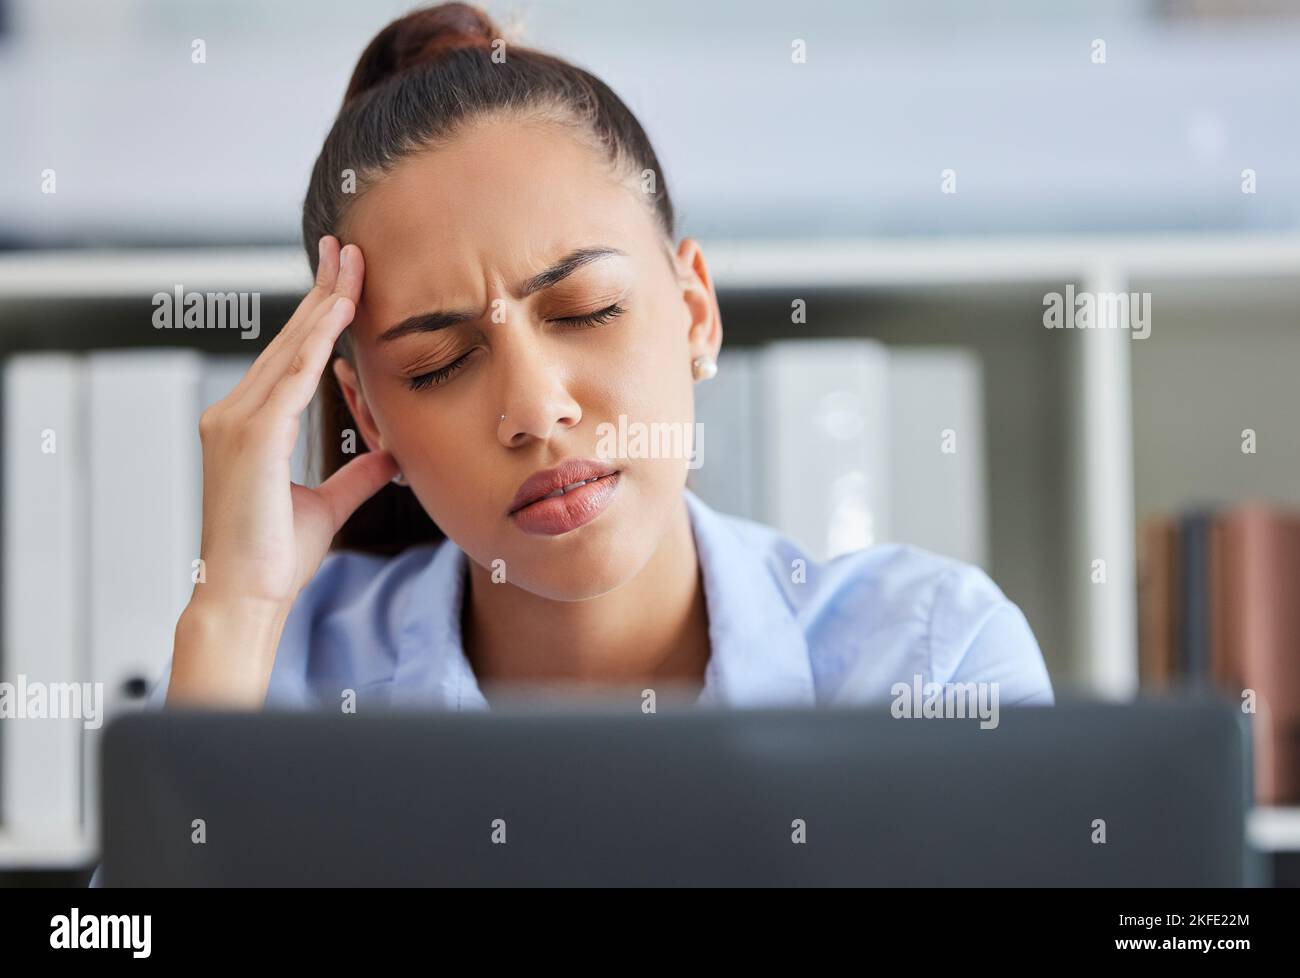 Headache, stress and burnout of business woman at computer with pain, stress and depression while tired and frustrated with work. Female entrepreneur Stock Photo